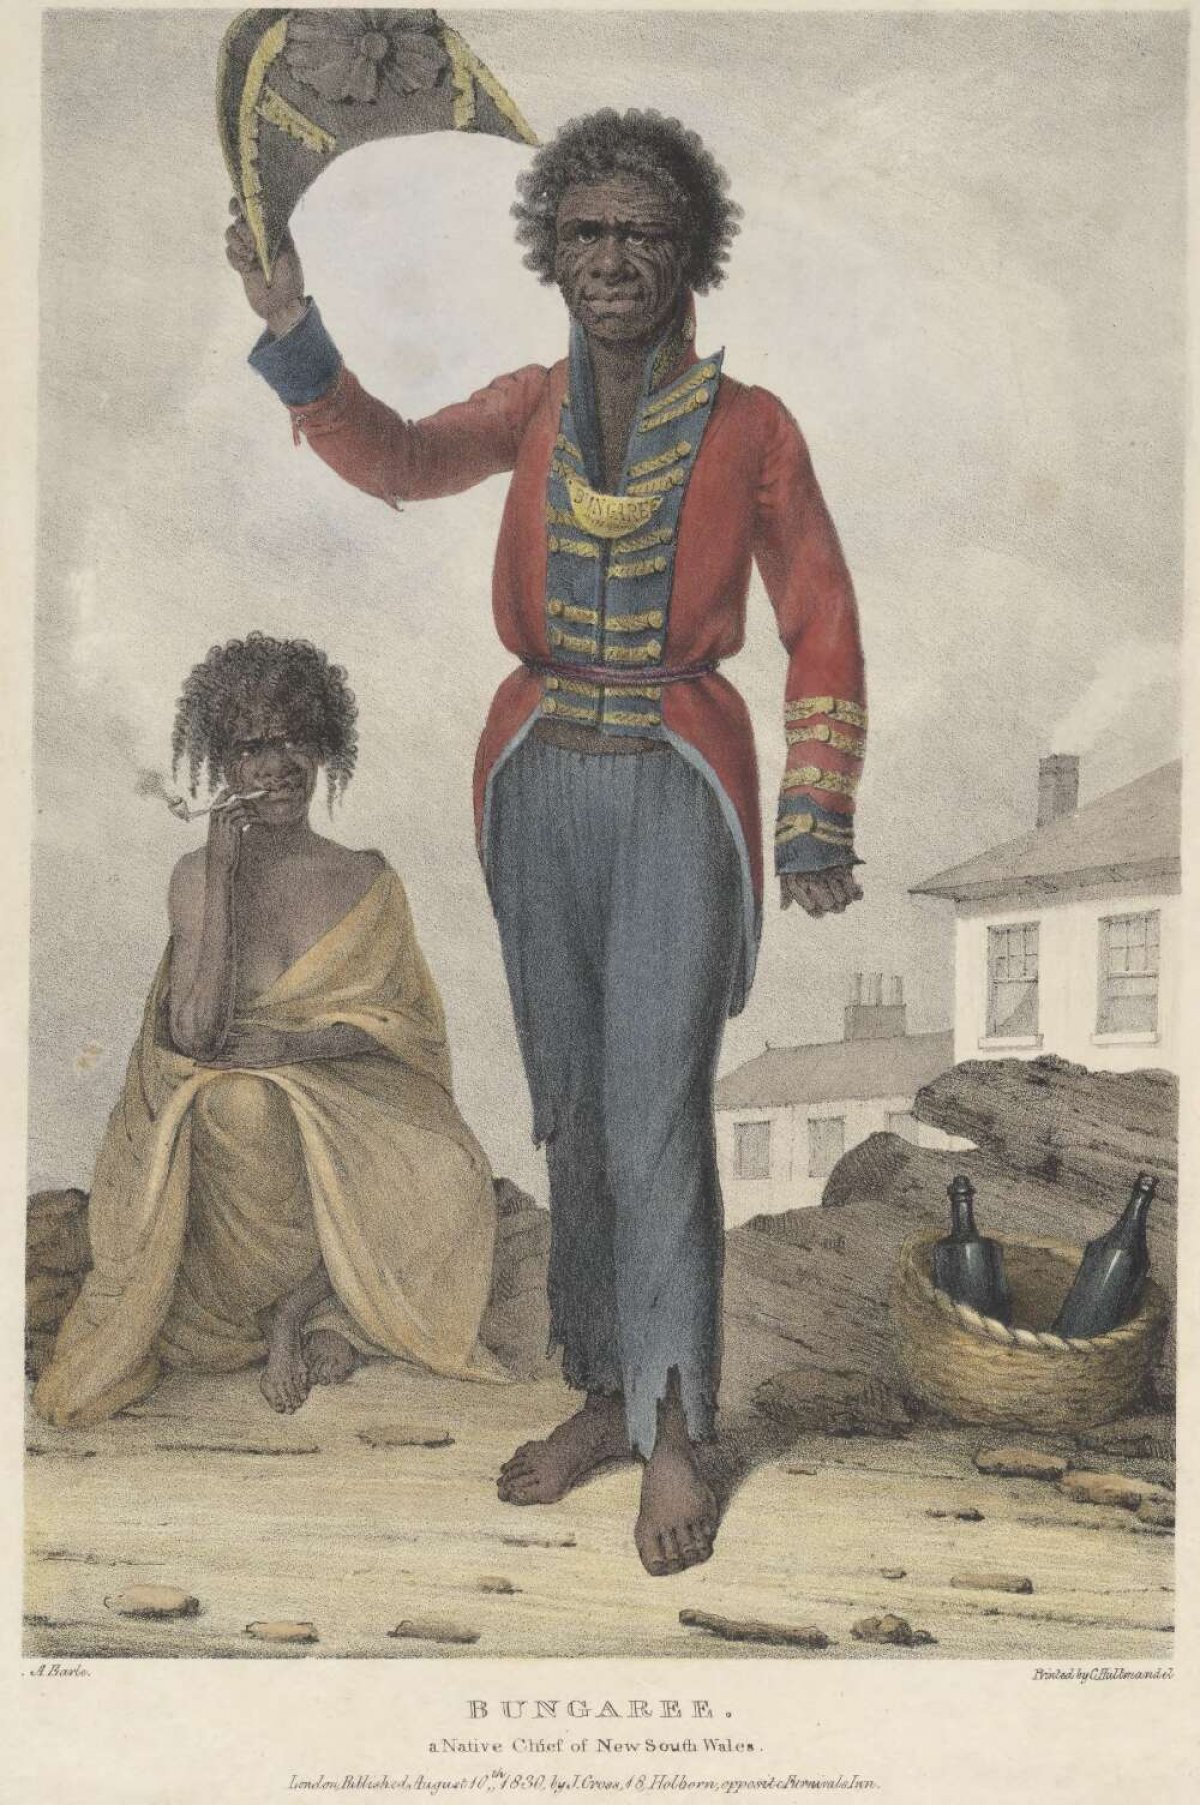 A portrait of a man. He has dark skin and hair. He is an Australian Indigenous man and is wearing a red, blue and gold European style officers coat and trousers. His trousers are tattered at the cuffs. He is holding a tricorn hat in the air. In the background an Indigenous women is seated, wrapped in a shawl. She is smoking a pipe. There is a woven basket with two empty bottles. In the background there is a white washed house with smoke curling from the chimney.